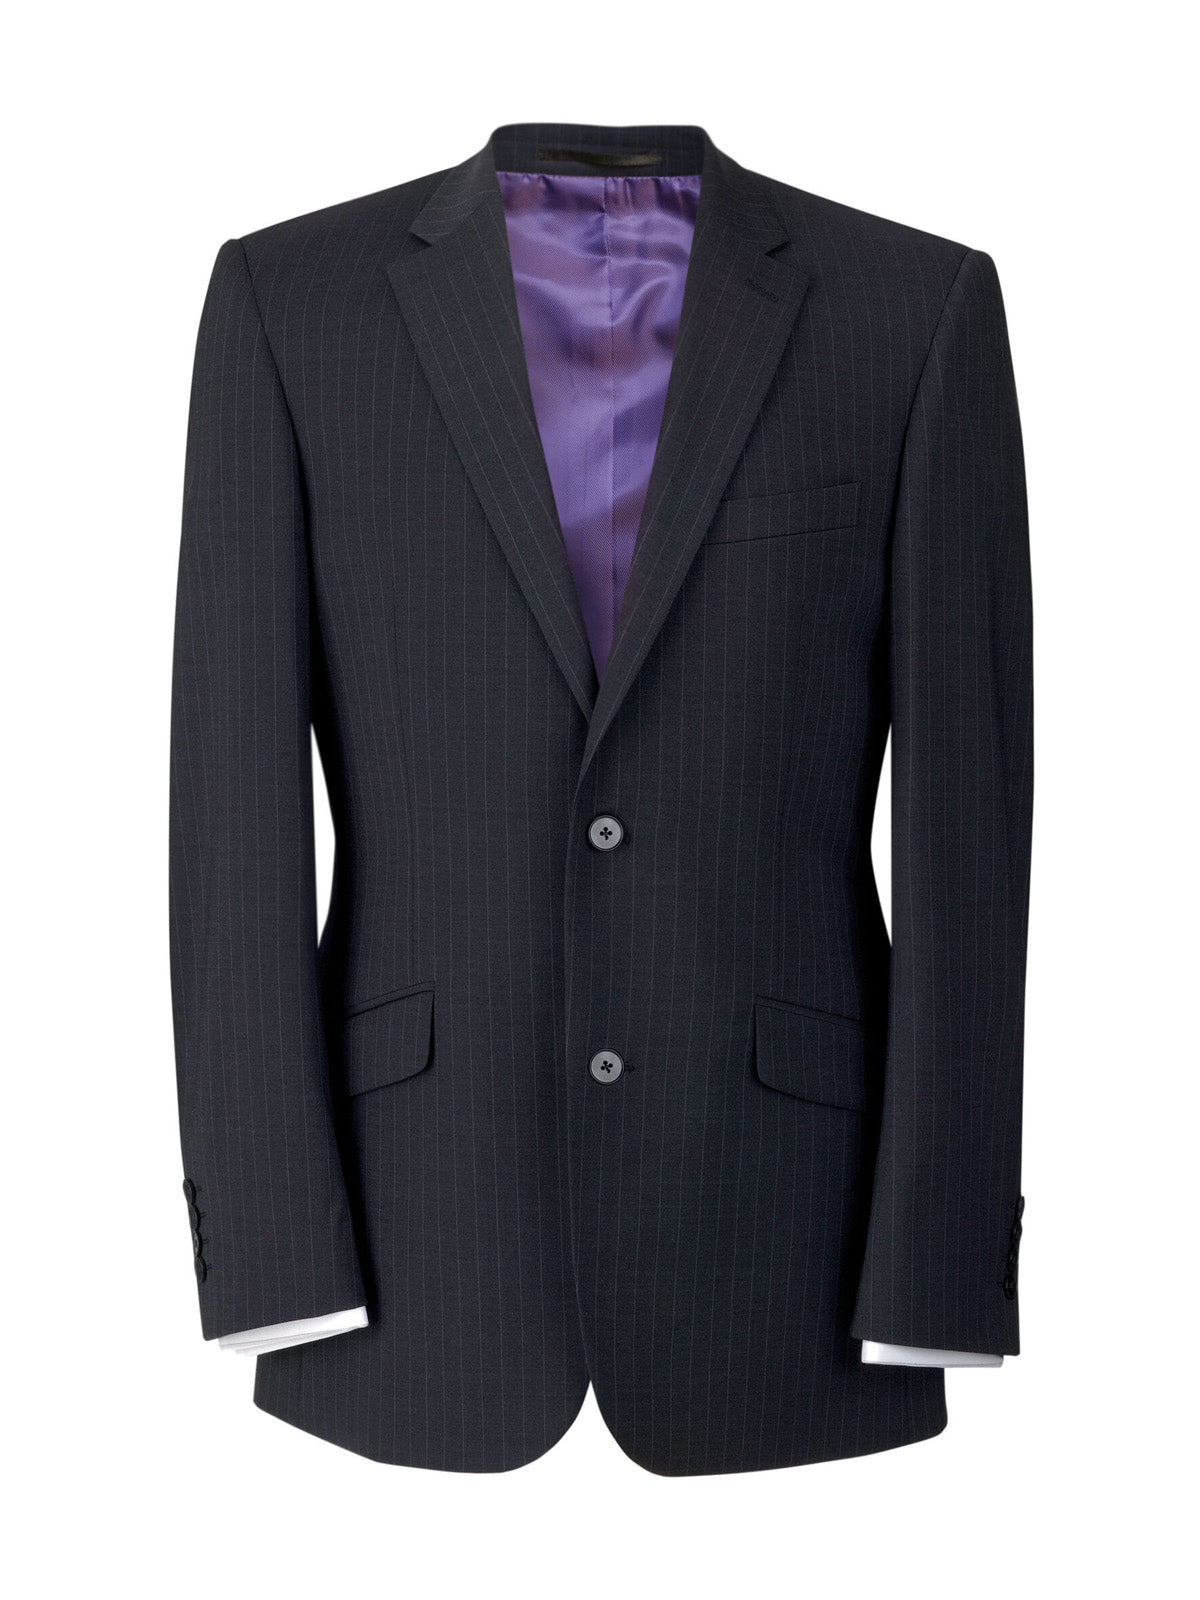 Brook Taverner Avalino Tailored Fit Jacket Charcoal Pinstripe